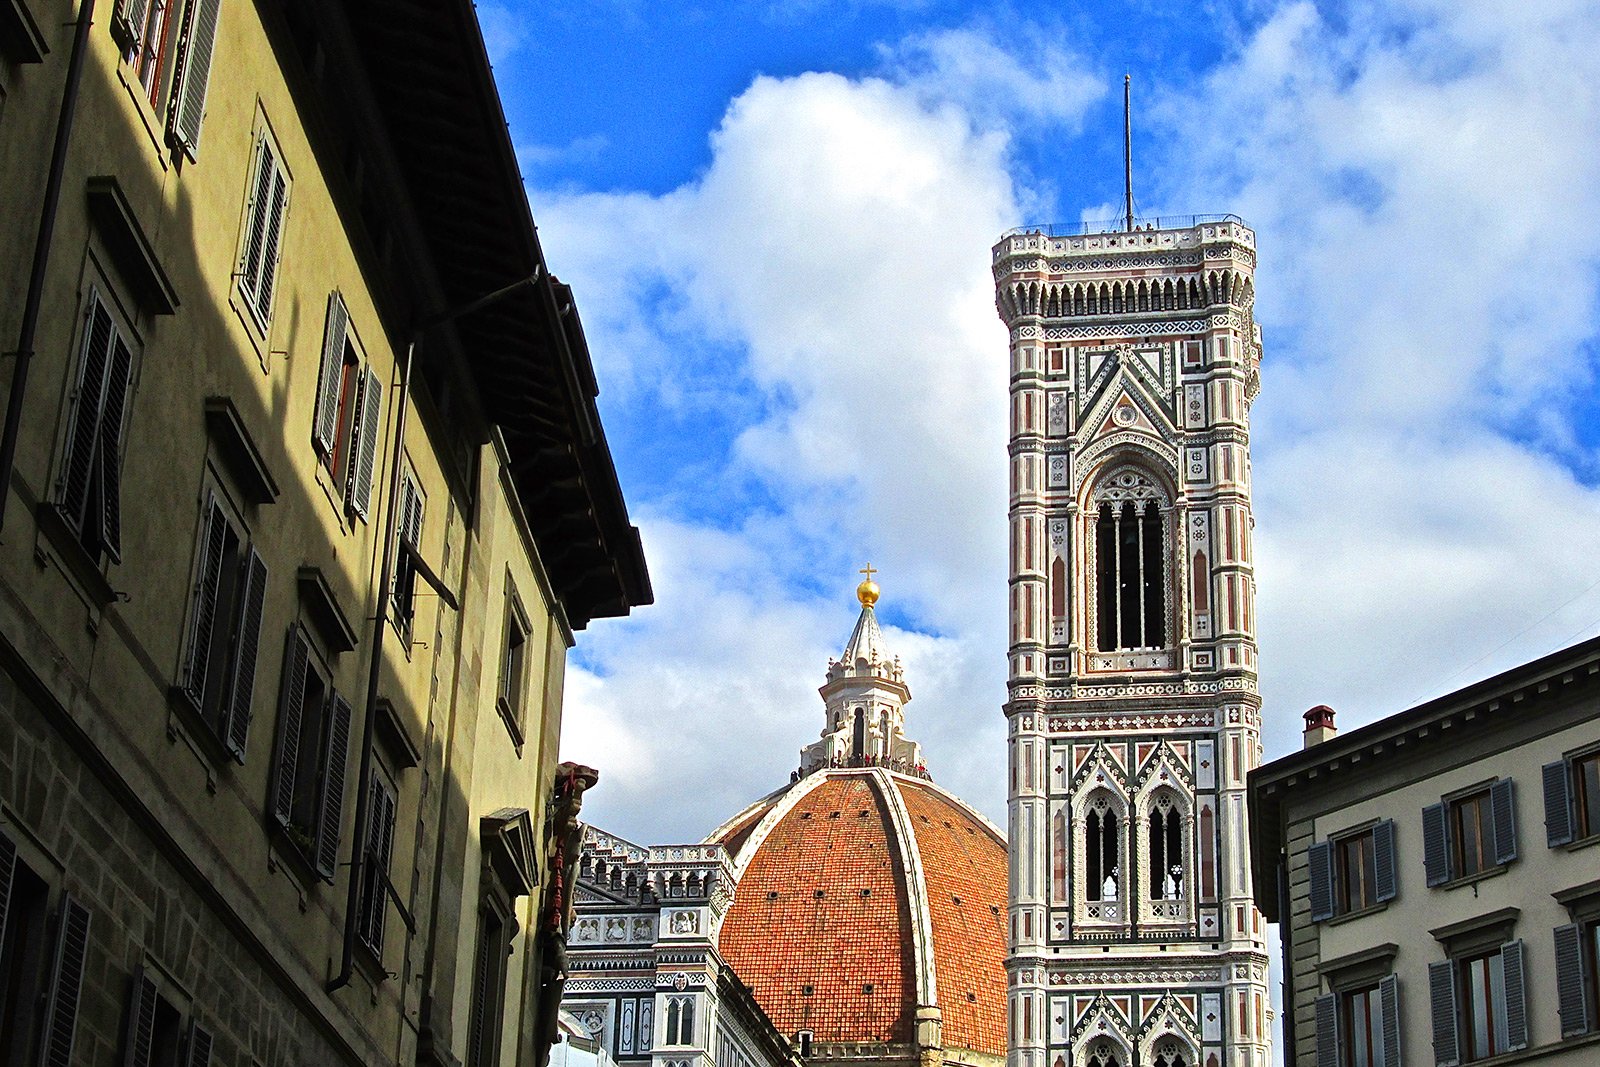 Giotto's Bell Tower, Florence